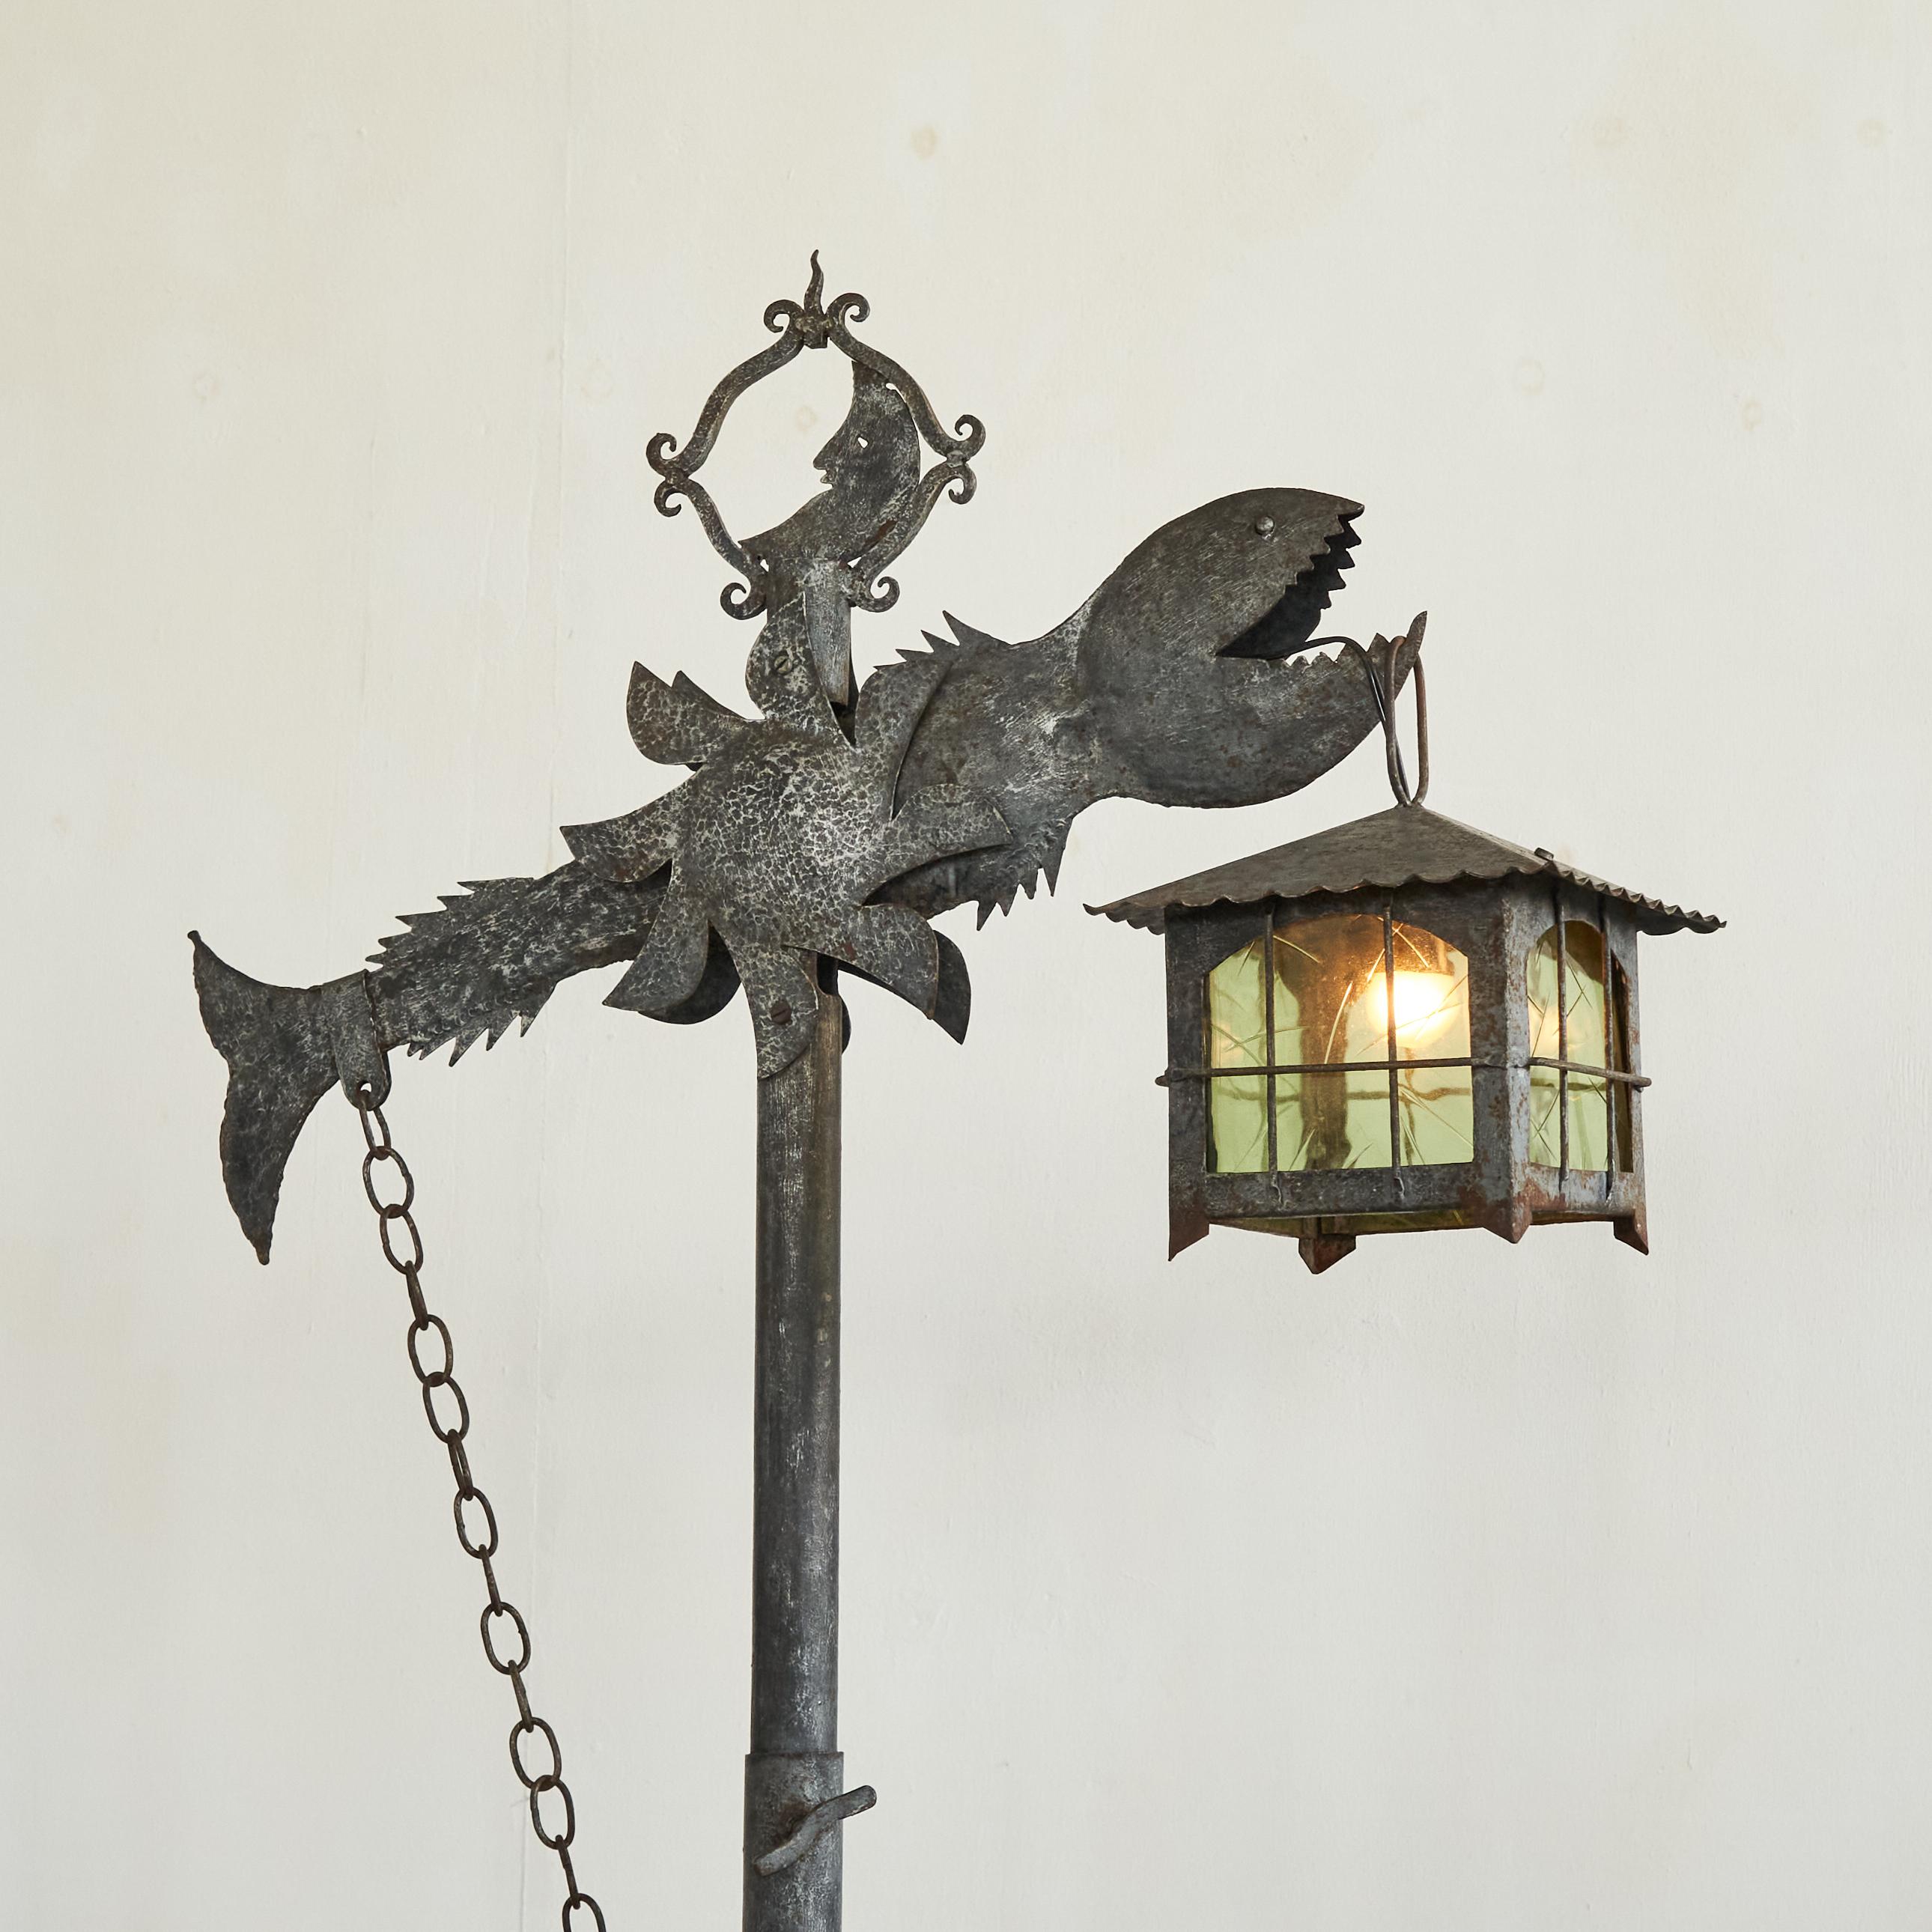 European Whimsical and Unique Brutalist Fish Lantern Floor Lamp in Wrought Iron 1960s For Sale